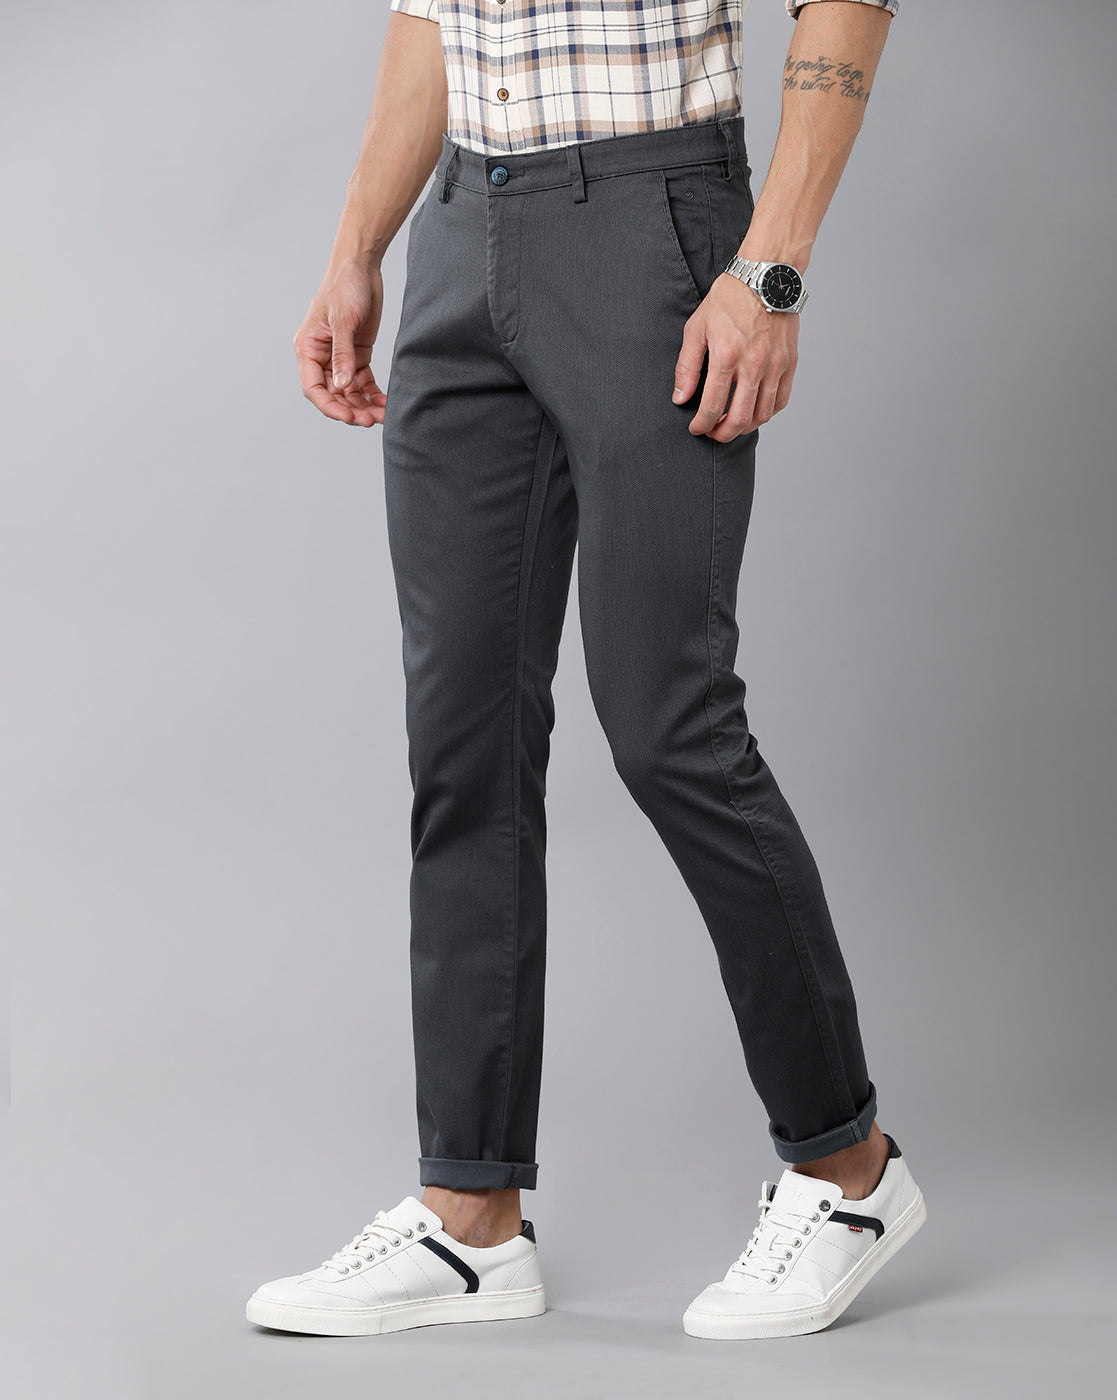 Smart Navy Formal Trousers by FHS Official for Men